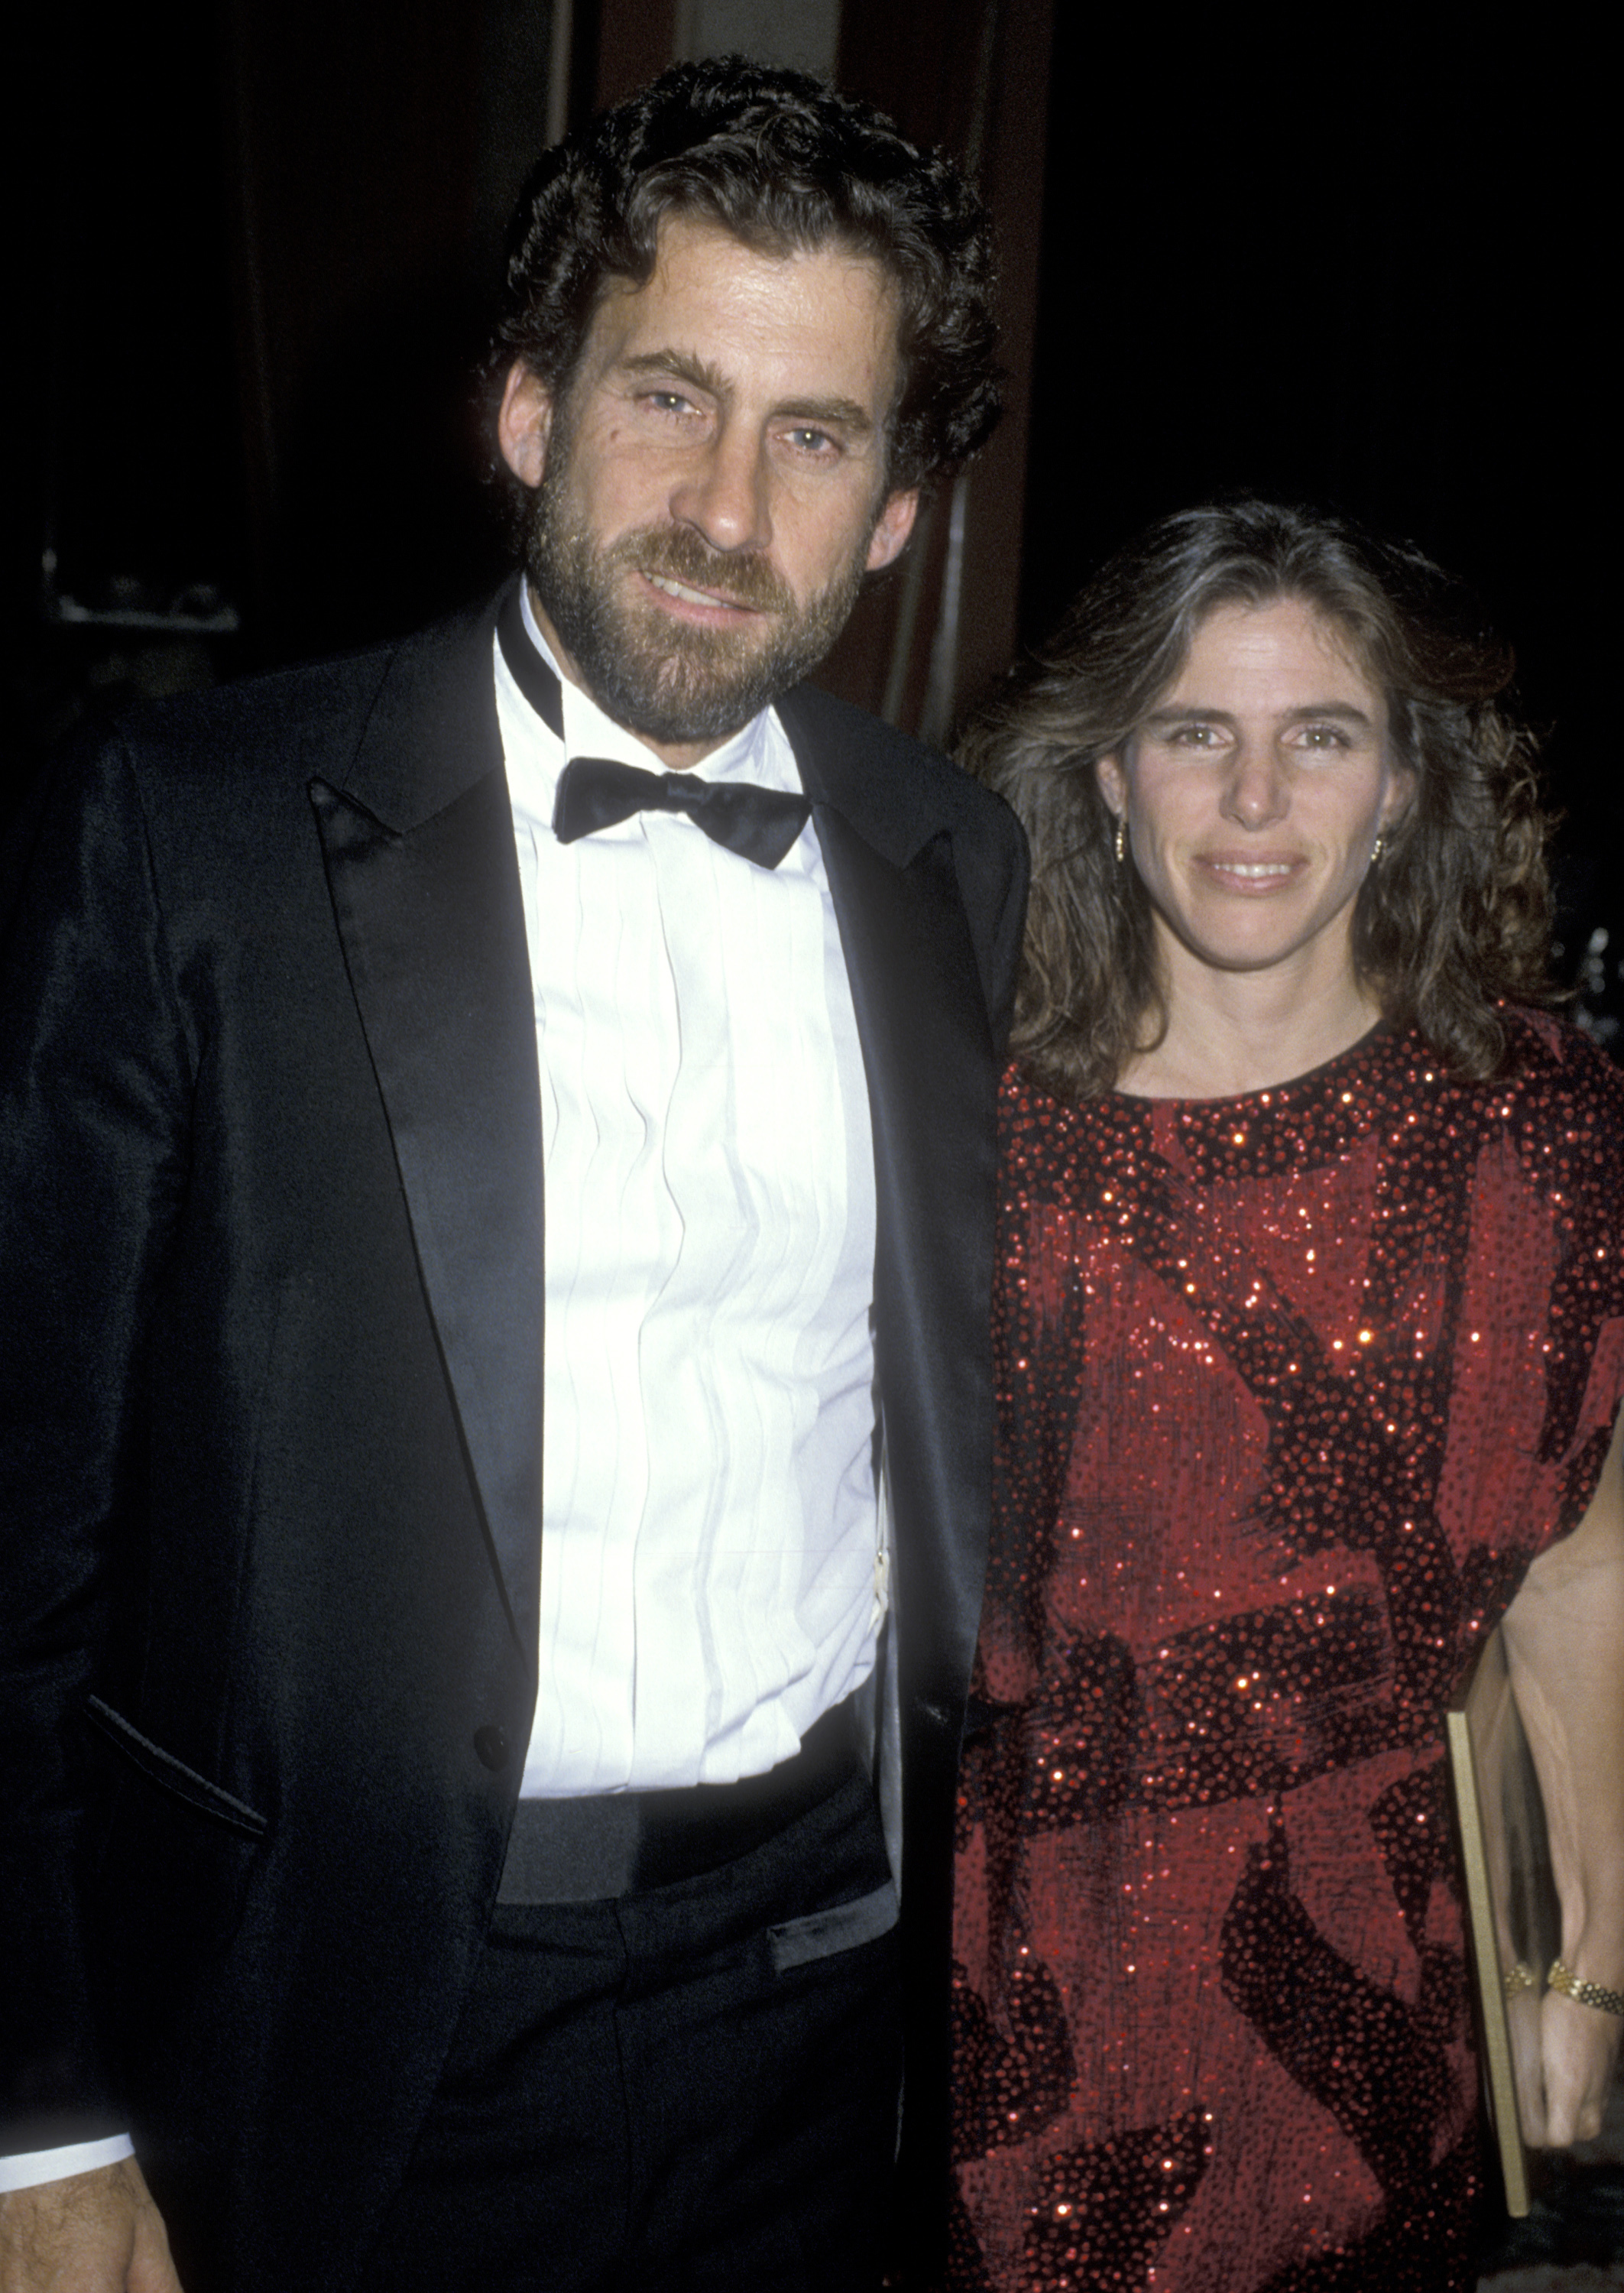 Paul Michael Glaser and wife Elizabeth Glaser attend the 38th Annual Directors Guild of America Awards on March 8, 1986 at Beverly Hilton Hotel in Beverly Hills, California | Source: Getty Images